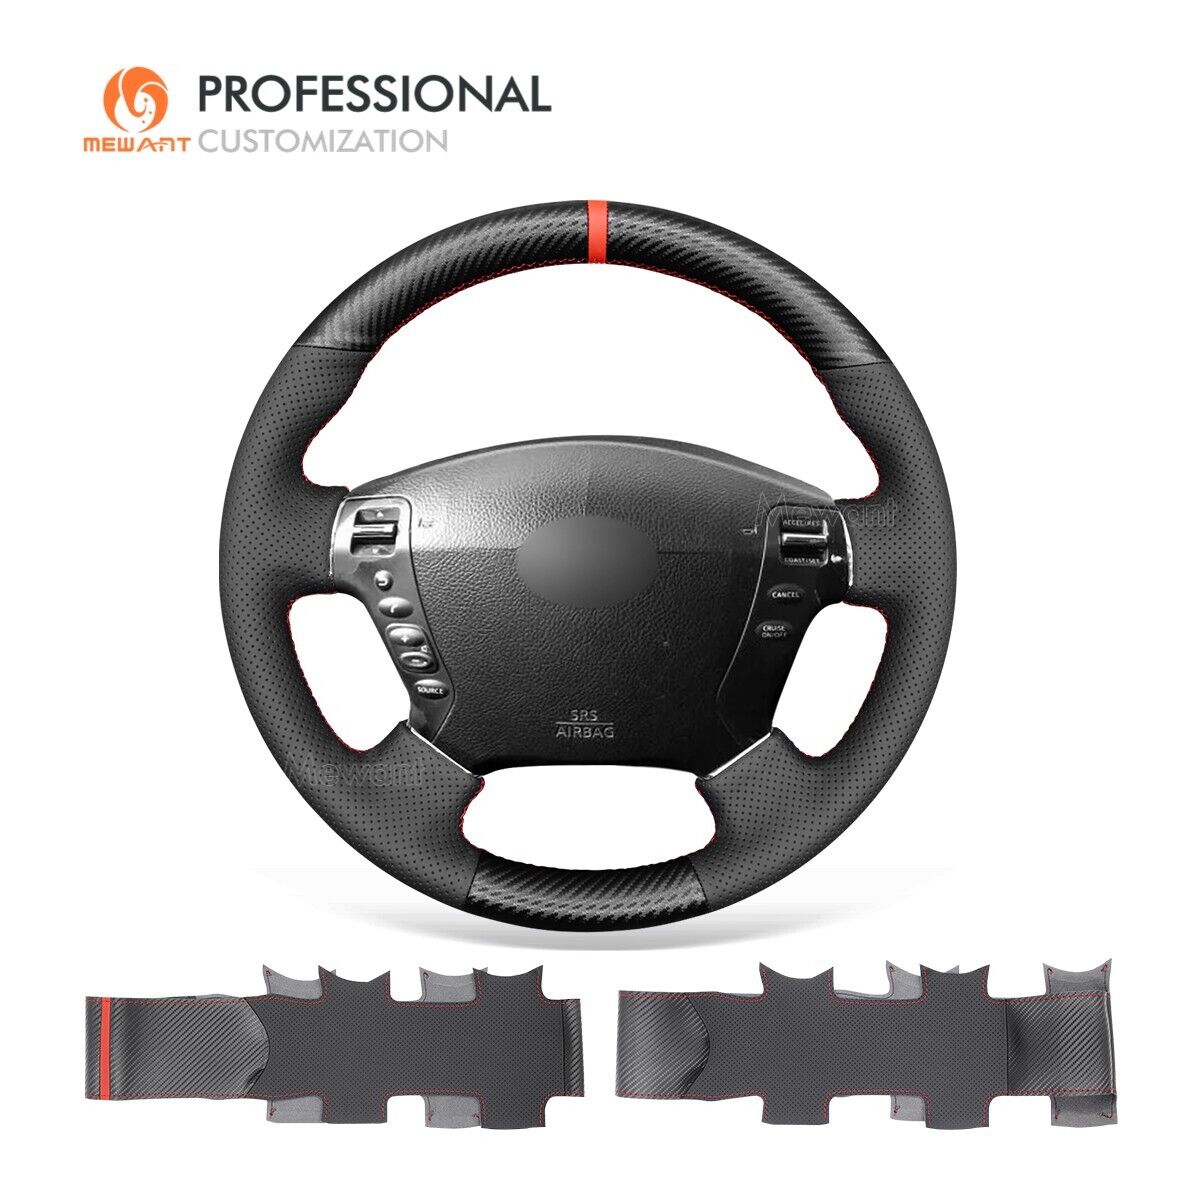 MEWANT Stitch PU Leather Carbon Fiber Steering Wheel Cover for Nissan Fuga Cima